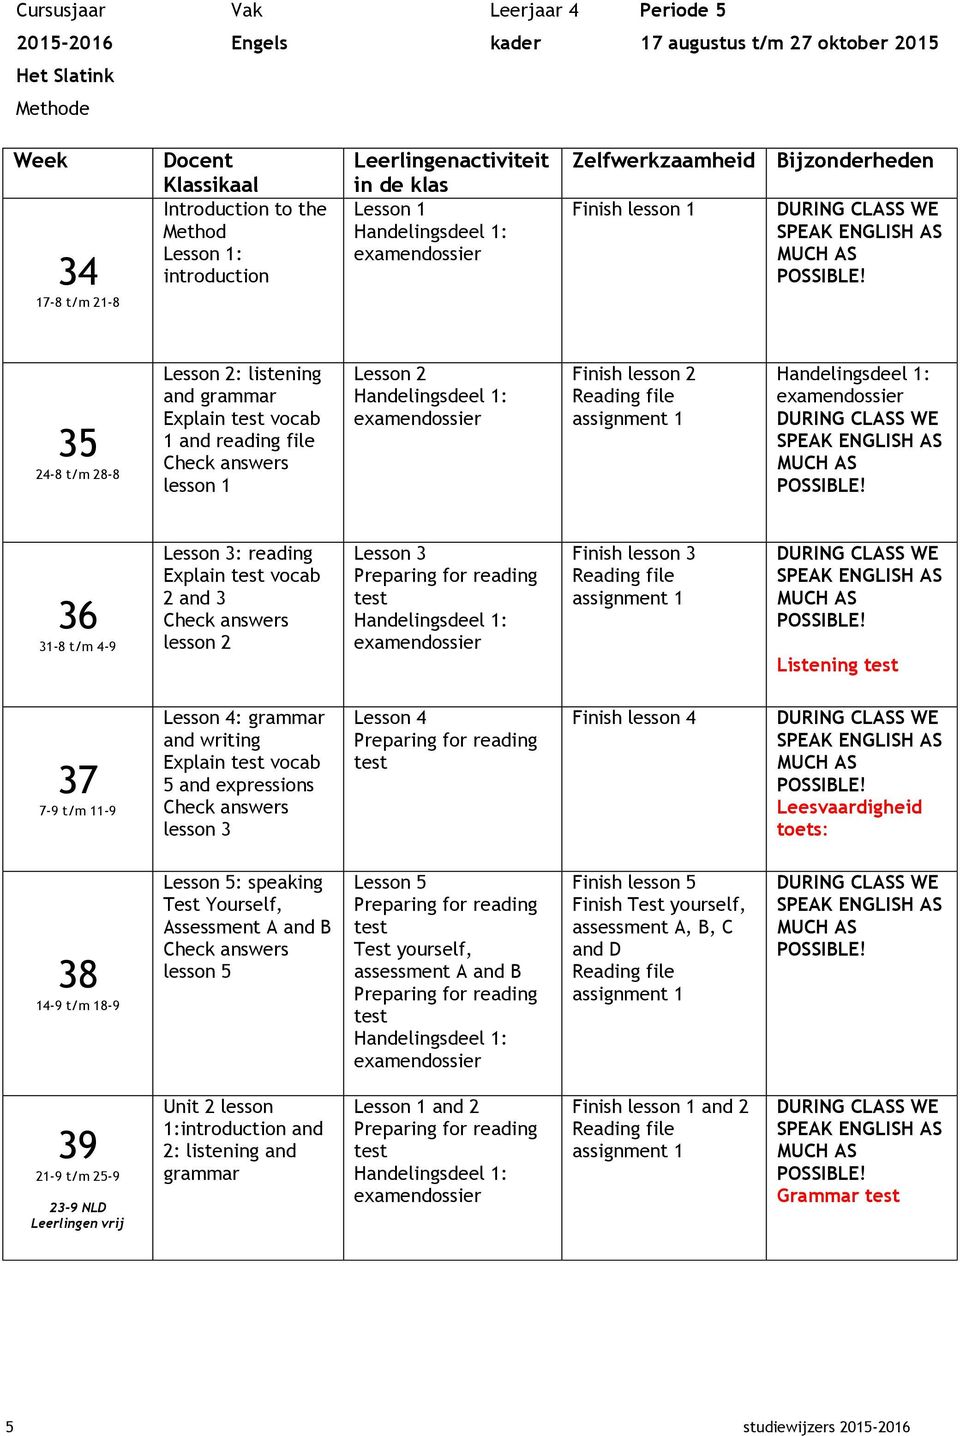 and 3 Check answers lesson 2 Lesson 3 Finish lesson 3 Reading file assignment 1 Listening 37 7-9 t/m 11-9 Lesson 4: grammar and writing Explain vocab 5 and expressions Check answers lesson 3 Lesson 4